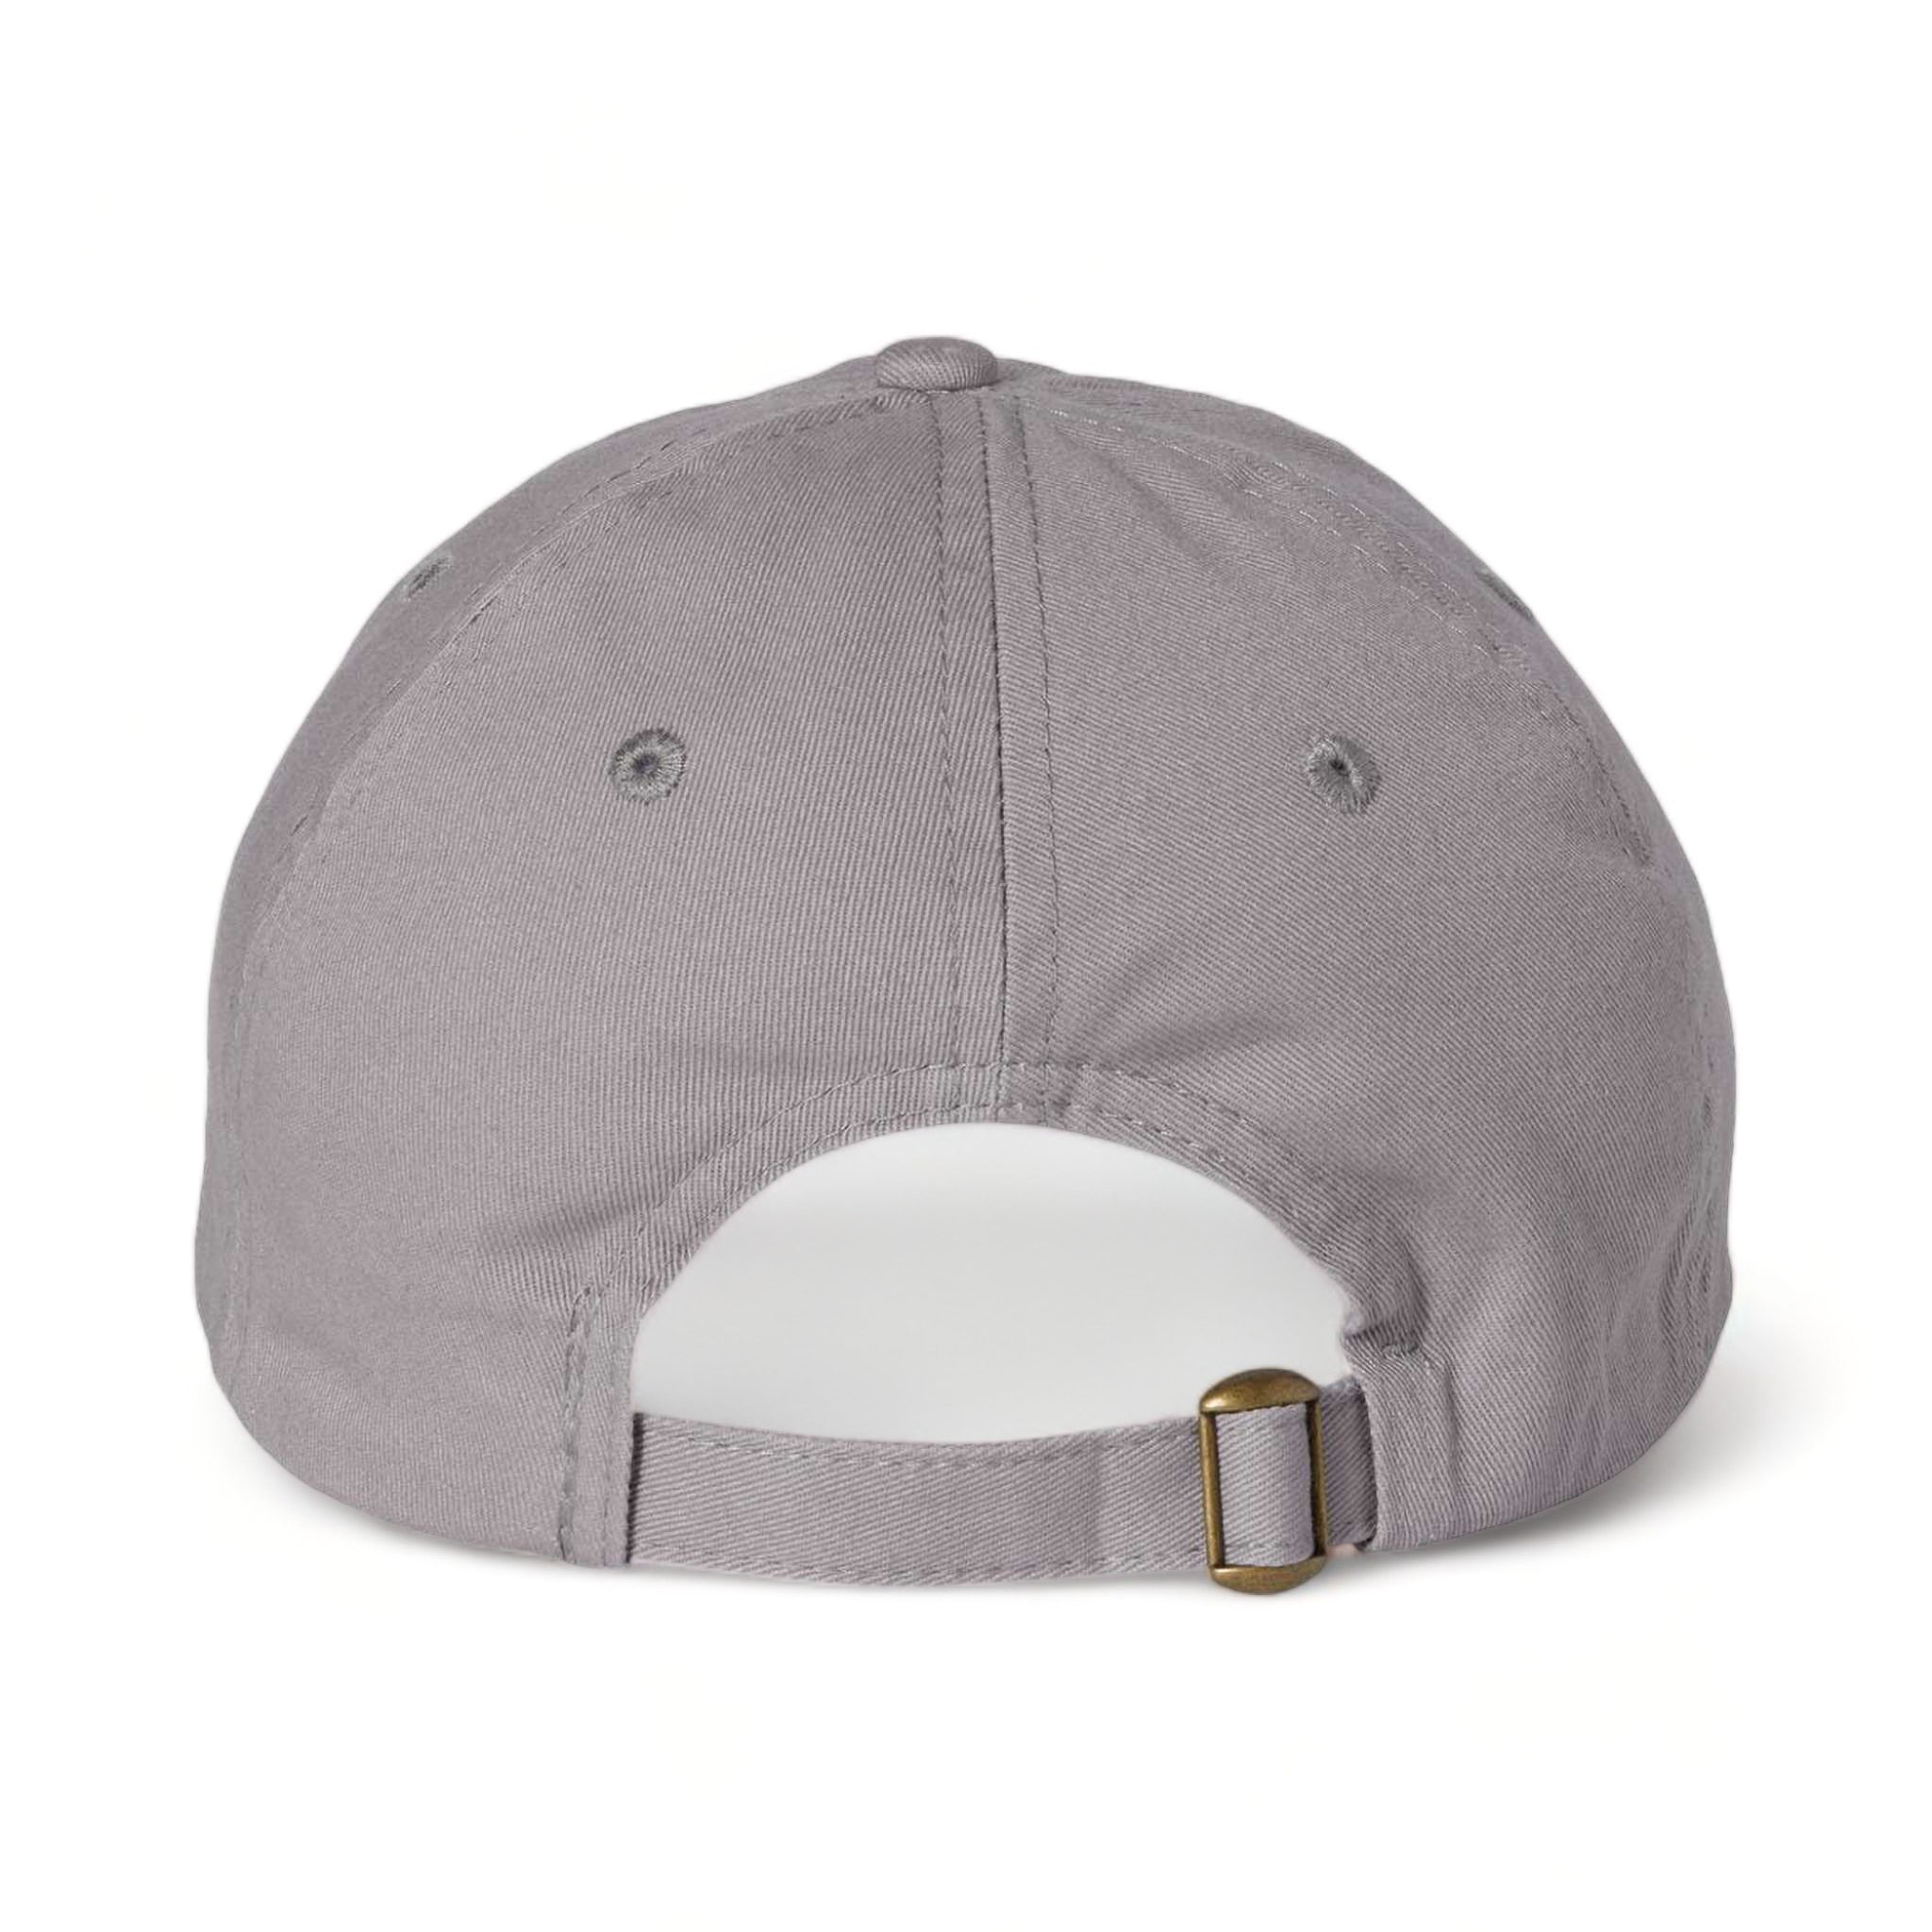 Back view of Valucap VC300A custom hat in grey